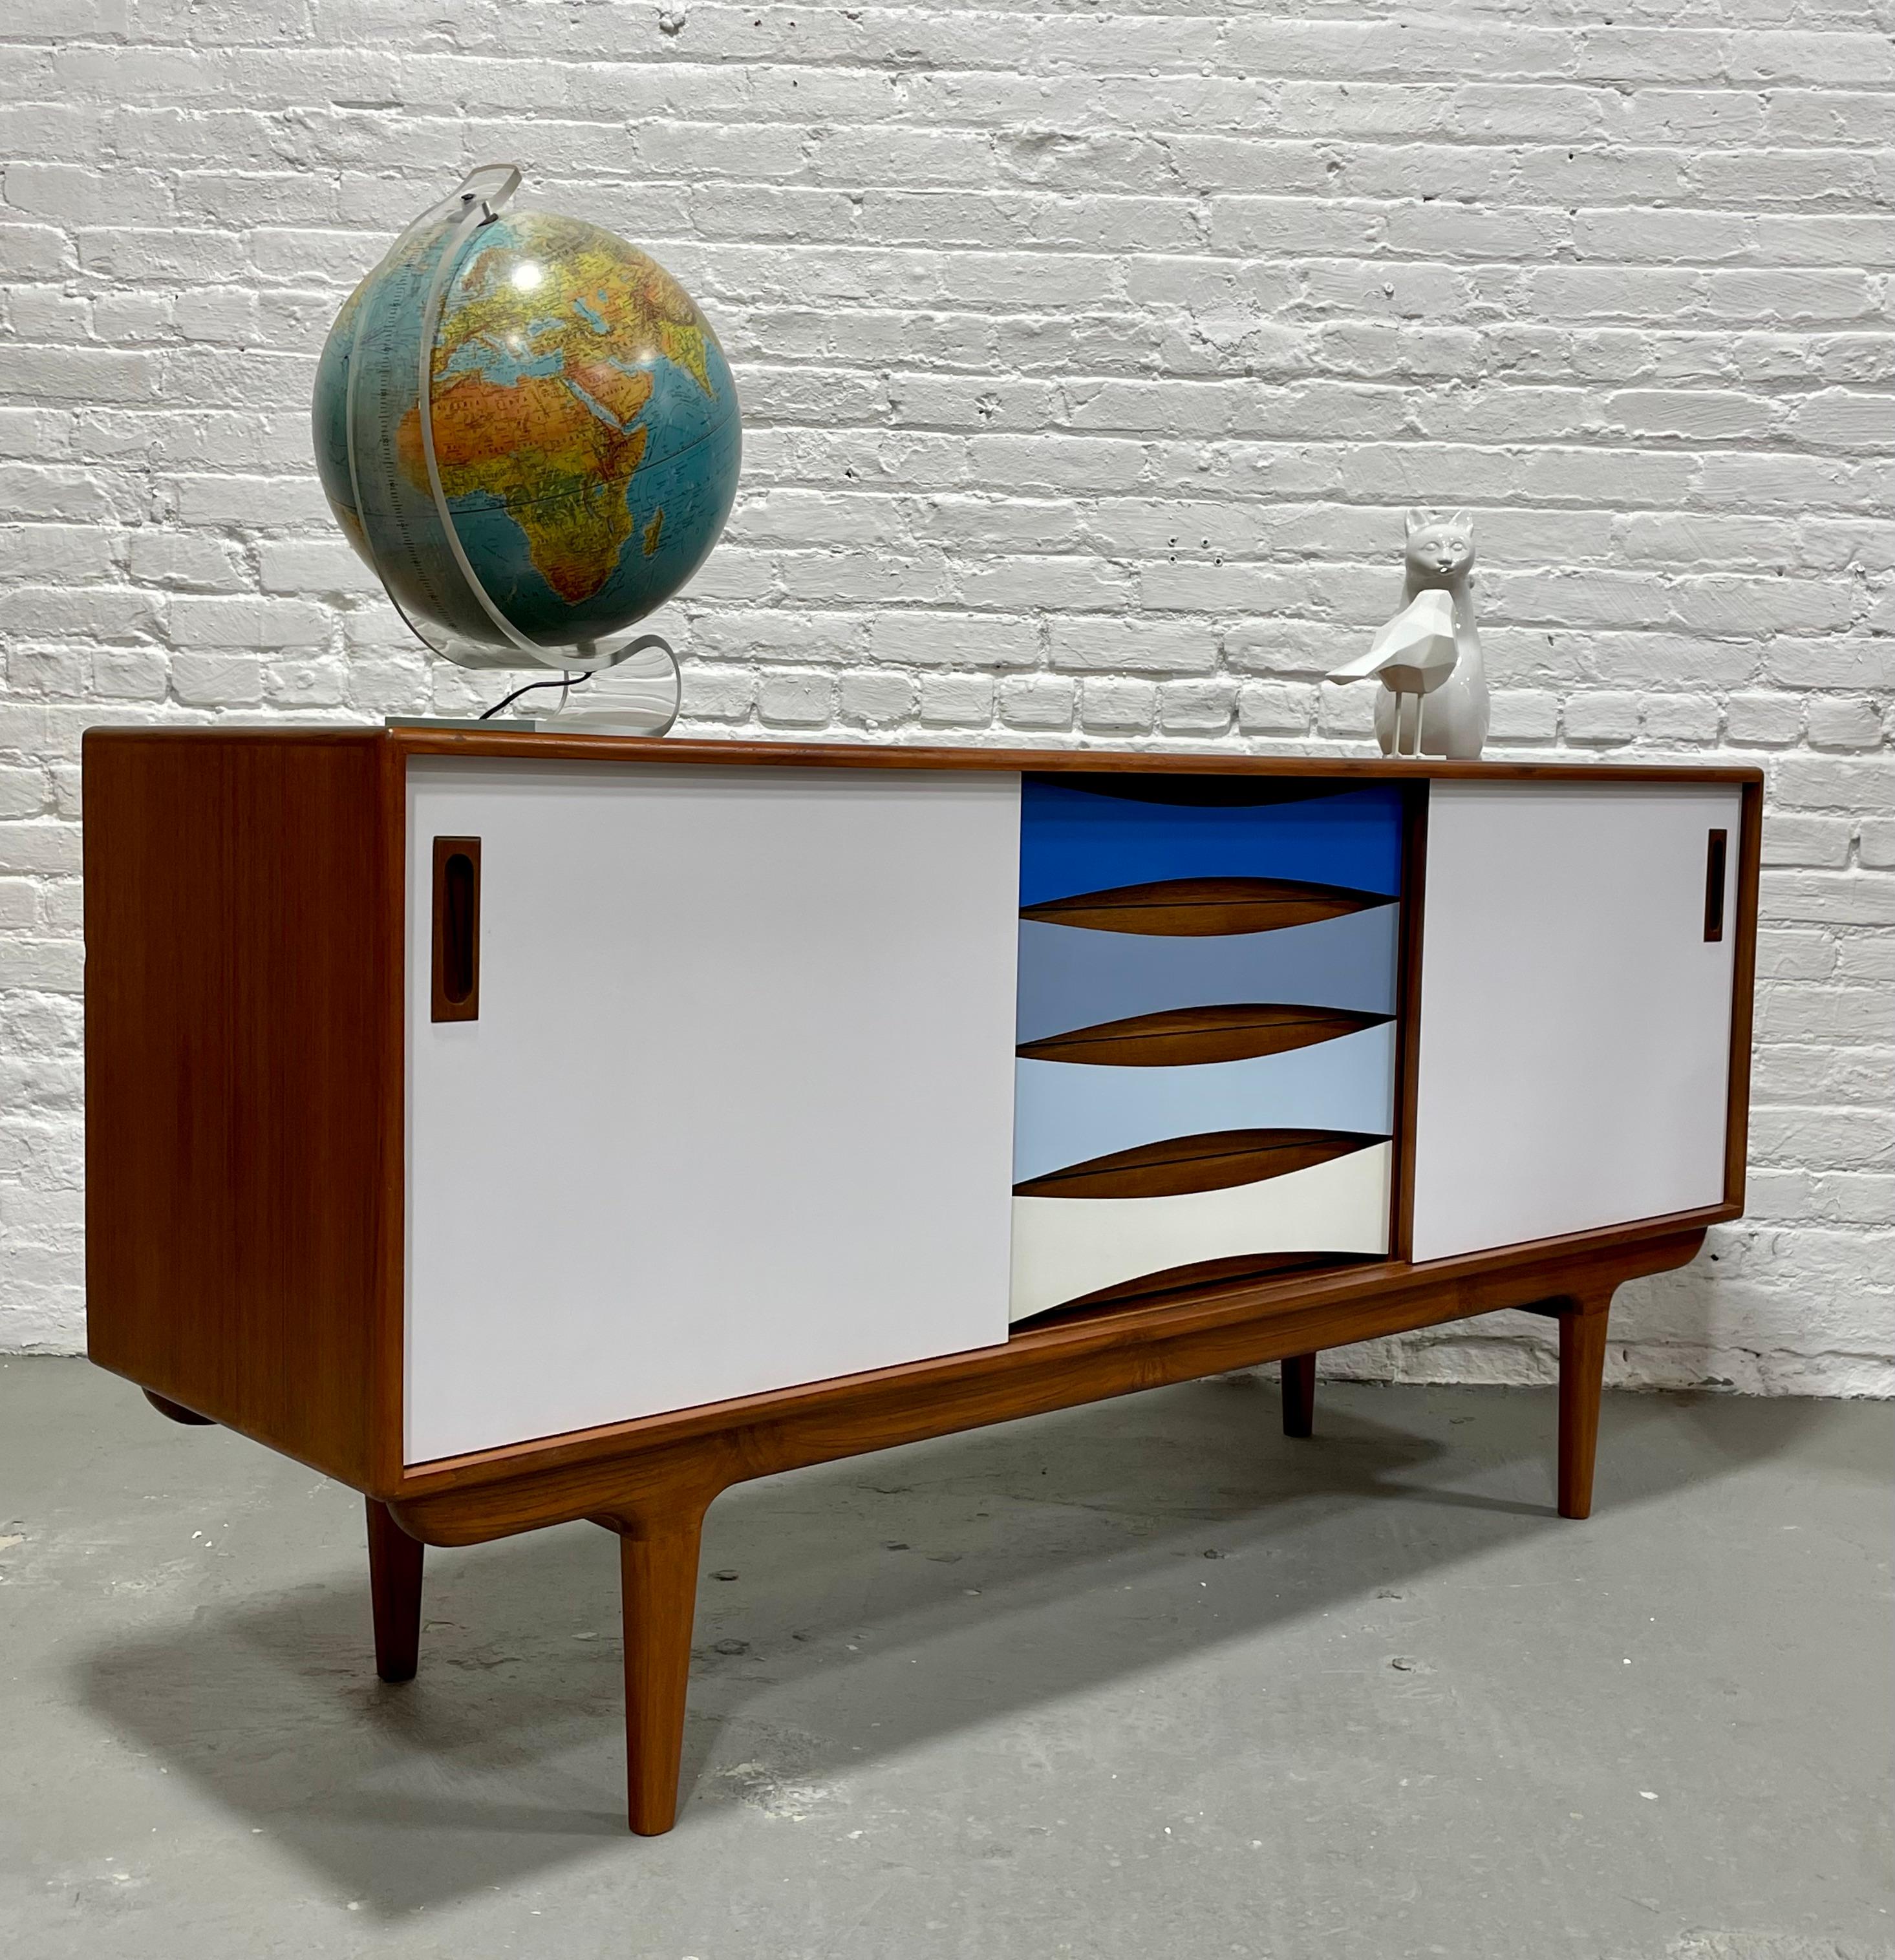 Contemporary Mid-Century Modern Shades of Blue Credenza / Sideboard / Media Stand